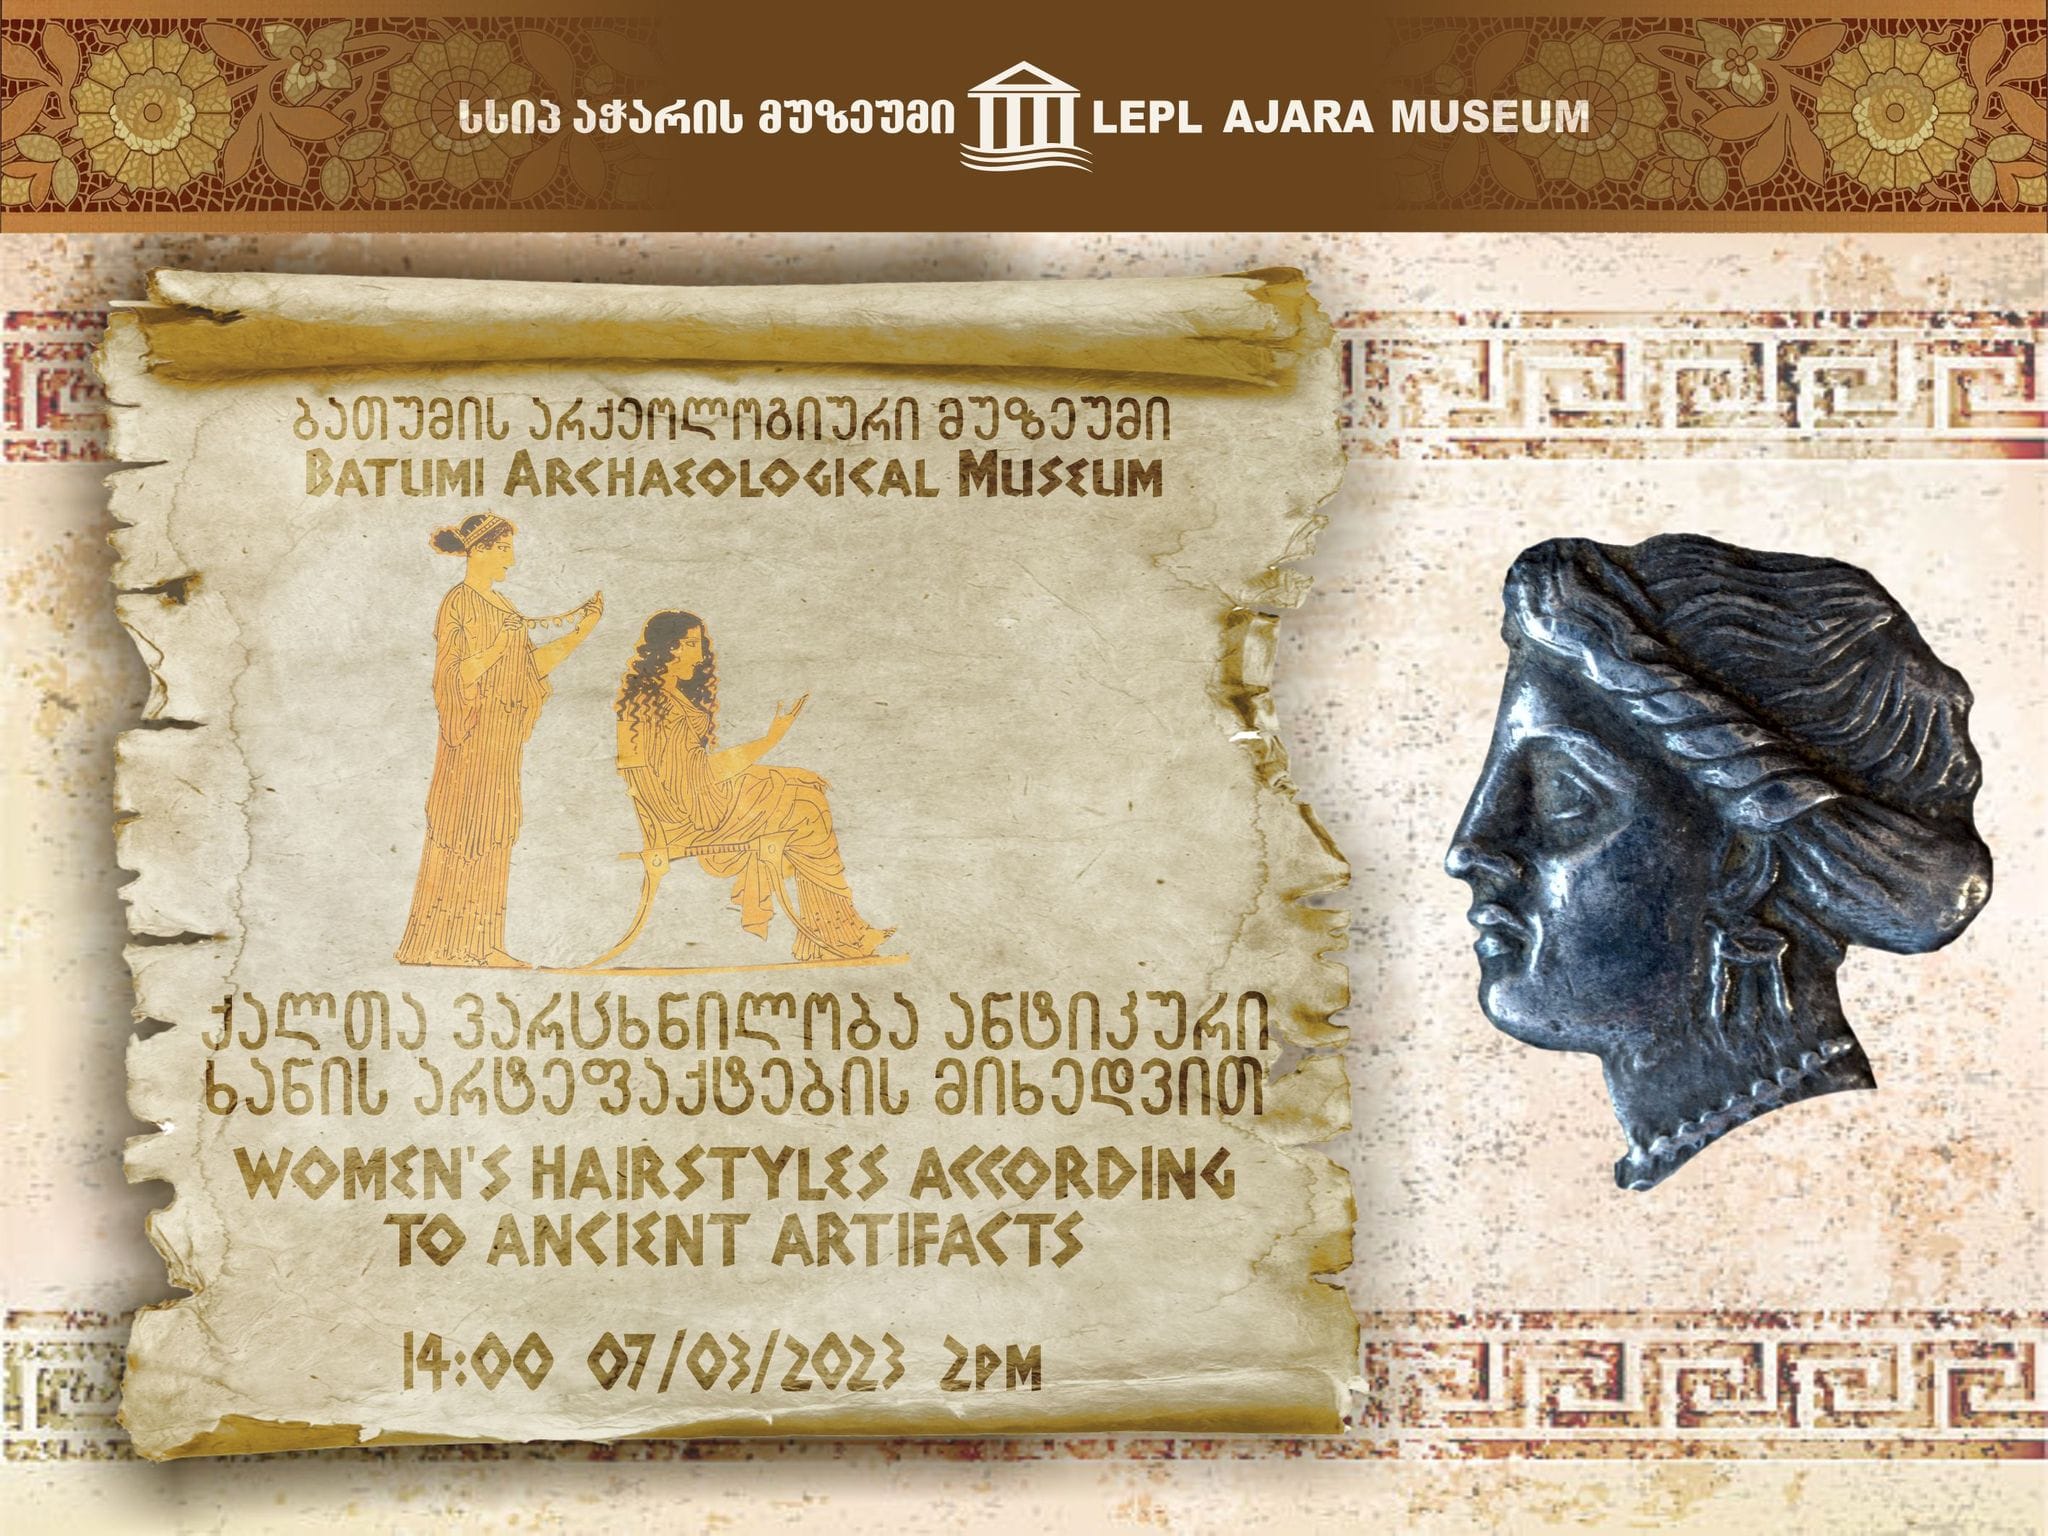 ''women's hairstyles according to ancient artifacts''.